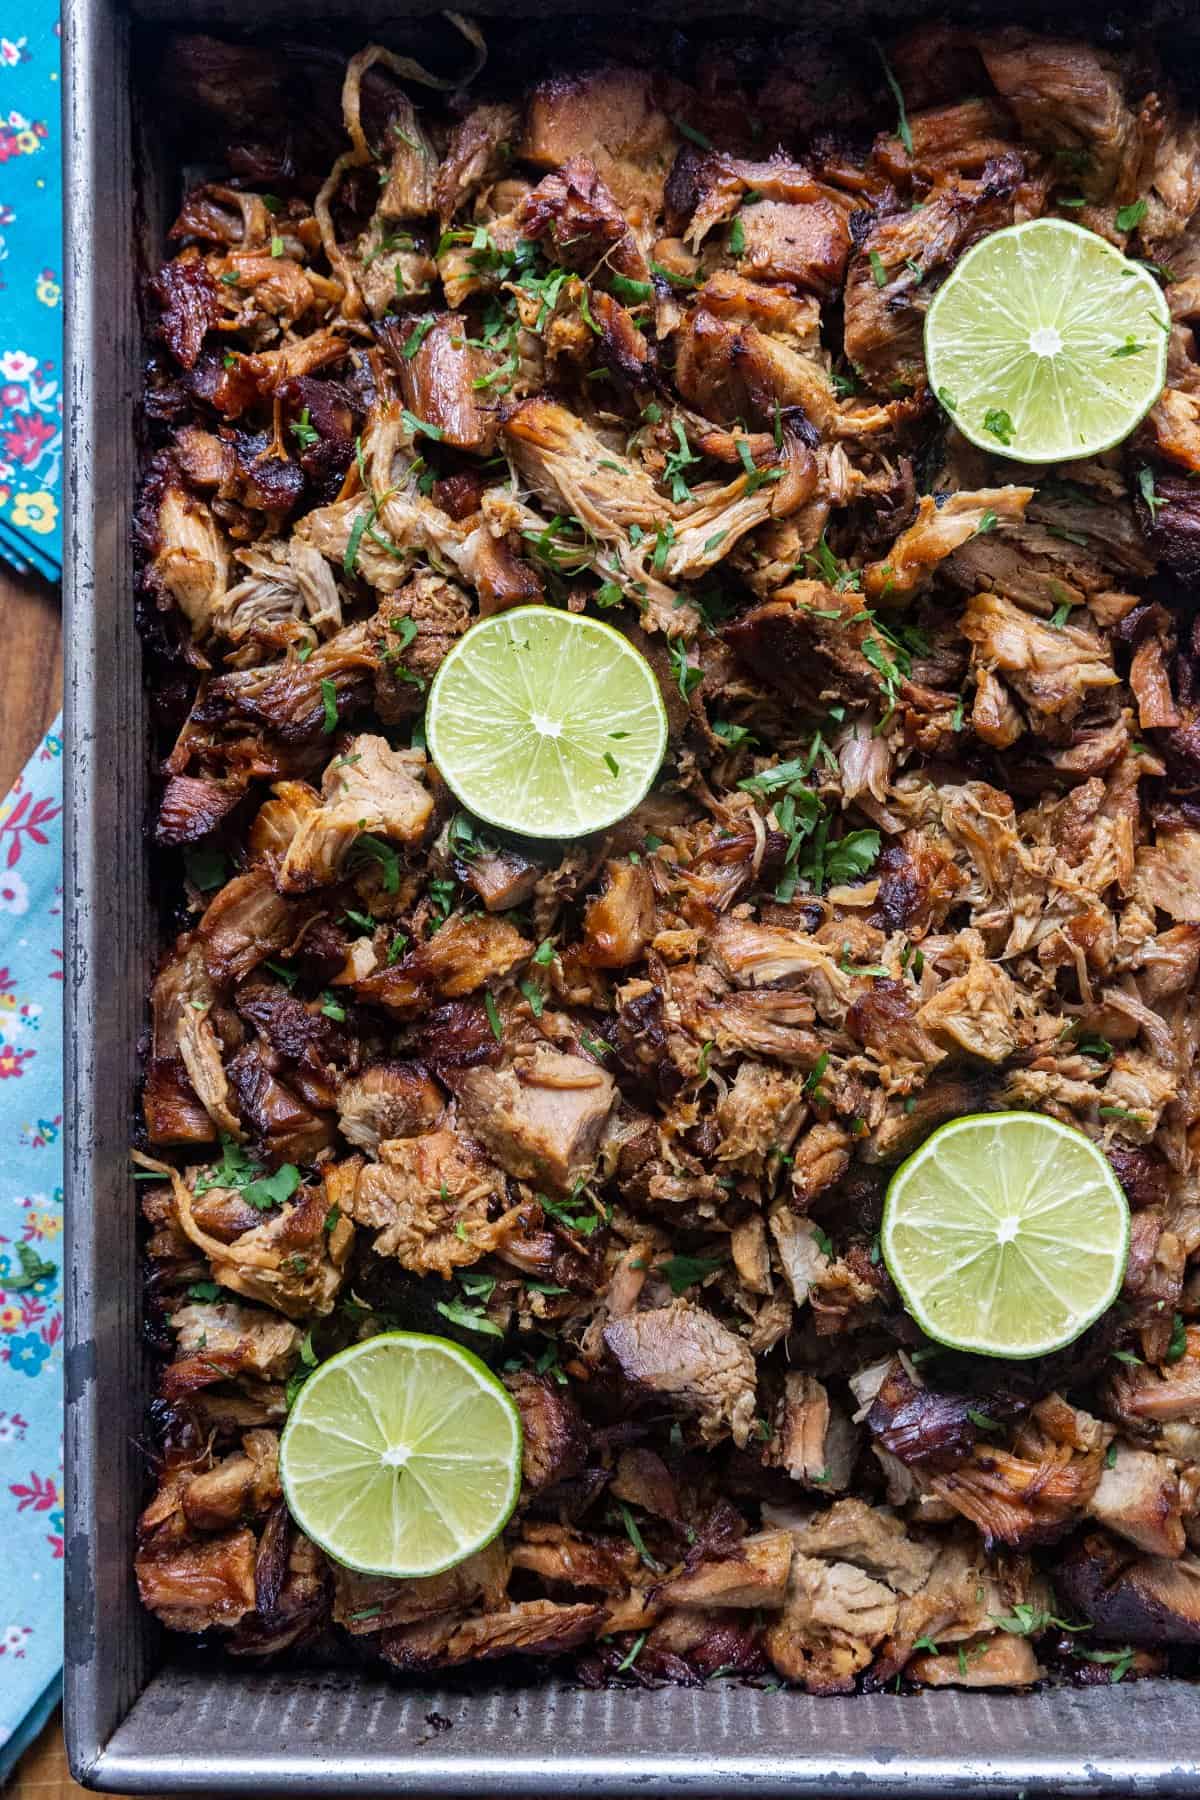 https://www.foodiewithfamily.com/wp-content/uploads/2022/02/slow-cooker-cuban-pork-6.jpg